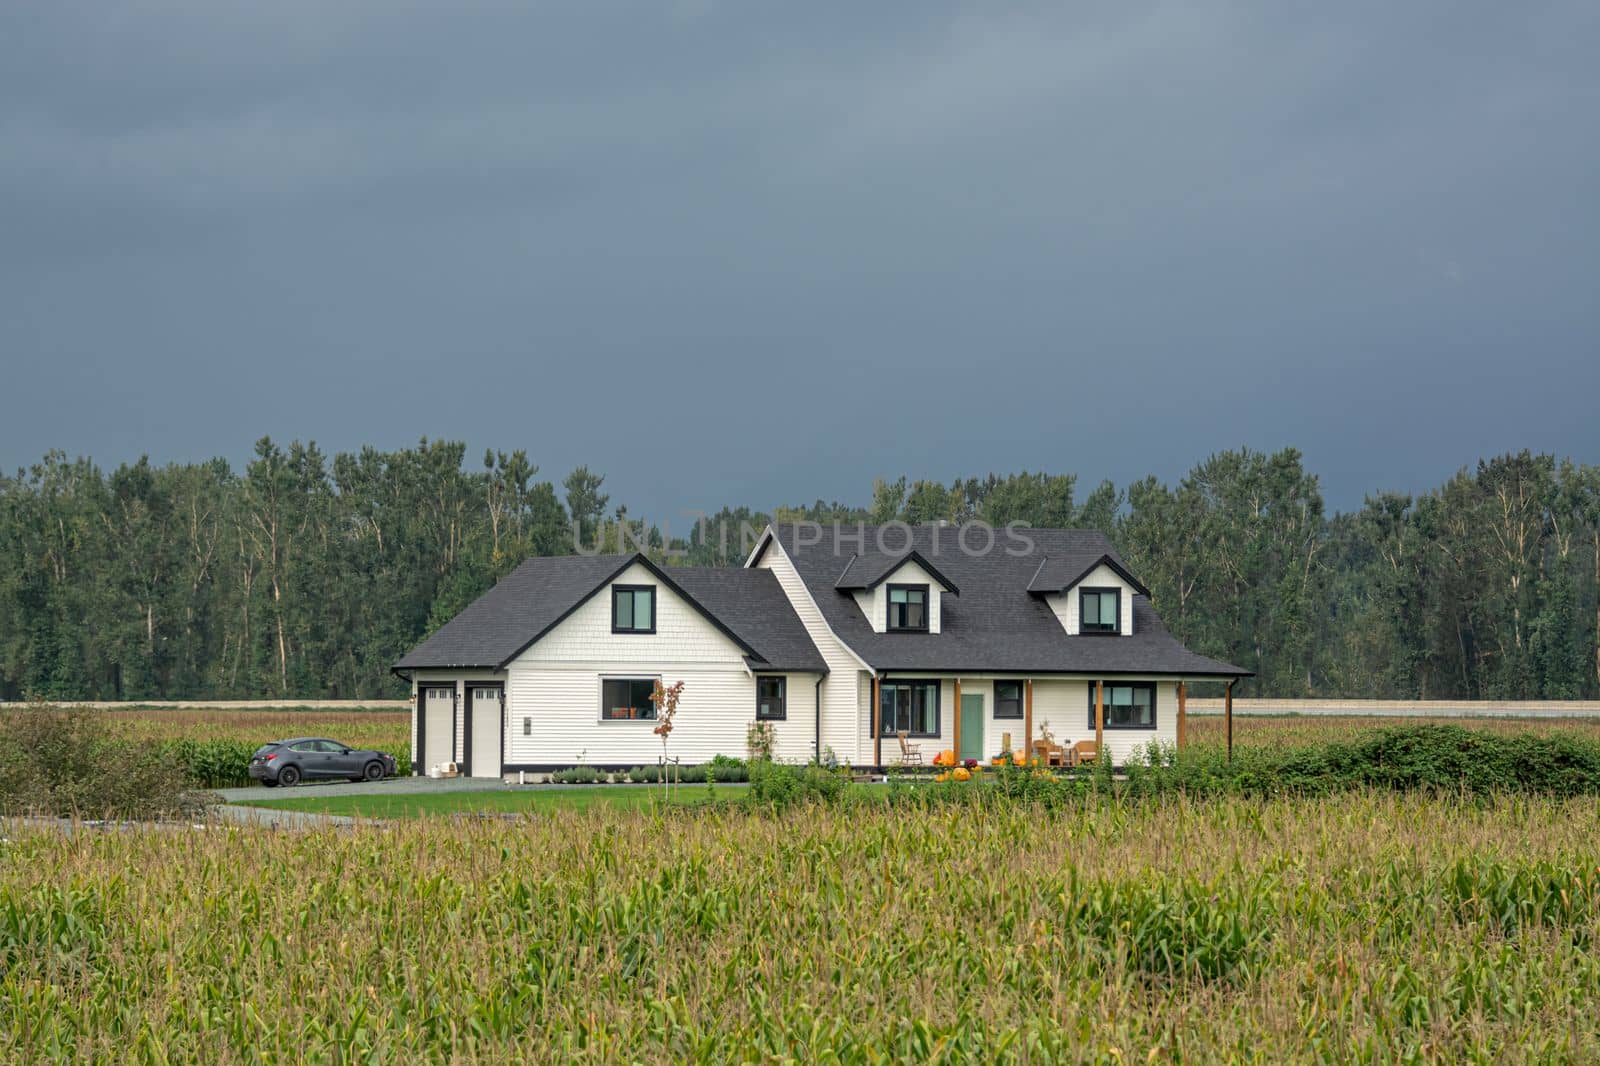 Brand new farmer's house in the middle of corn field by Imagenet